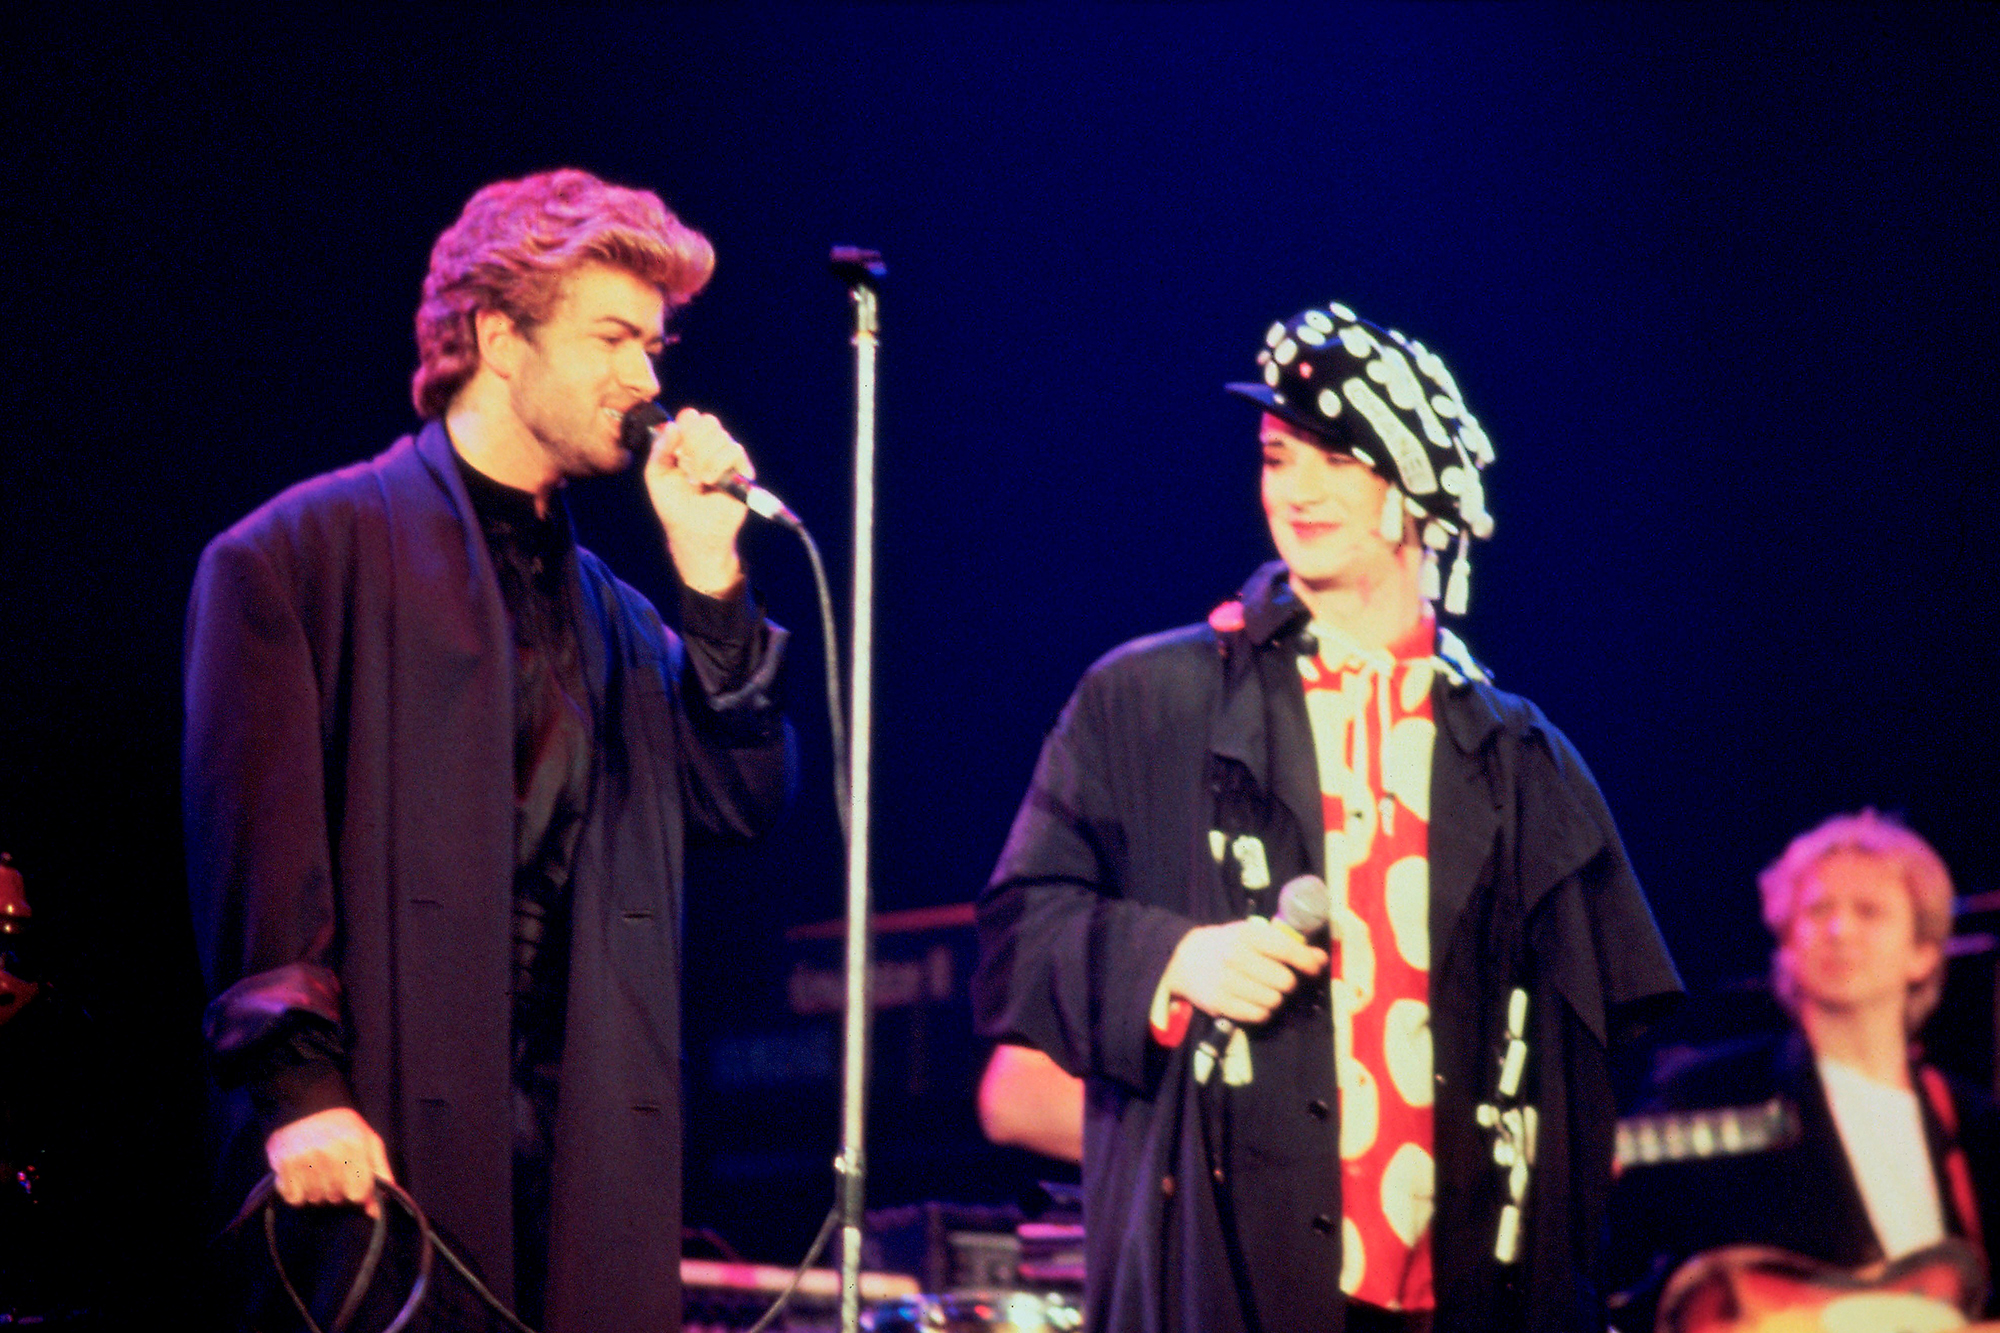 George Michael performs with Boy George and The Police's Andy Summers at an AIDS awareness concert in London, April 1987.